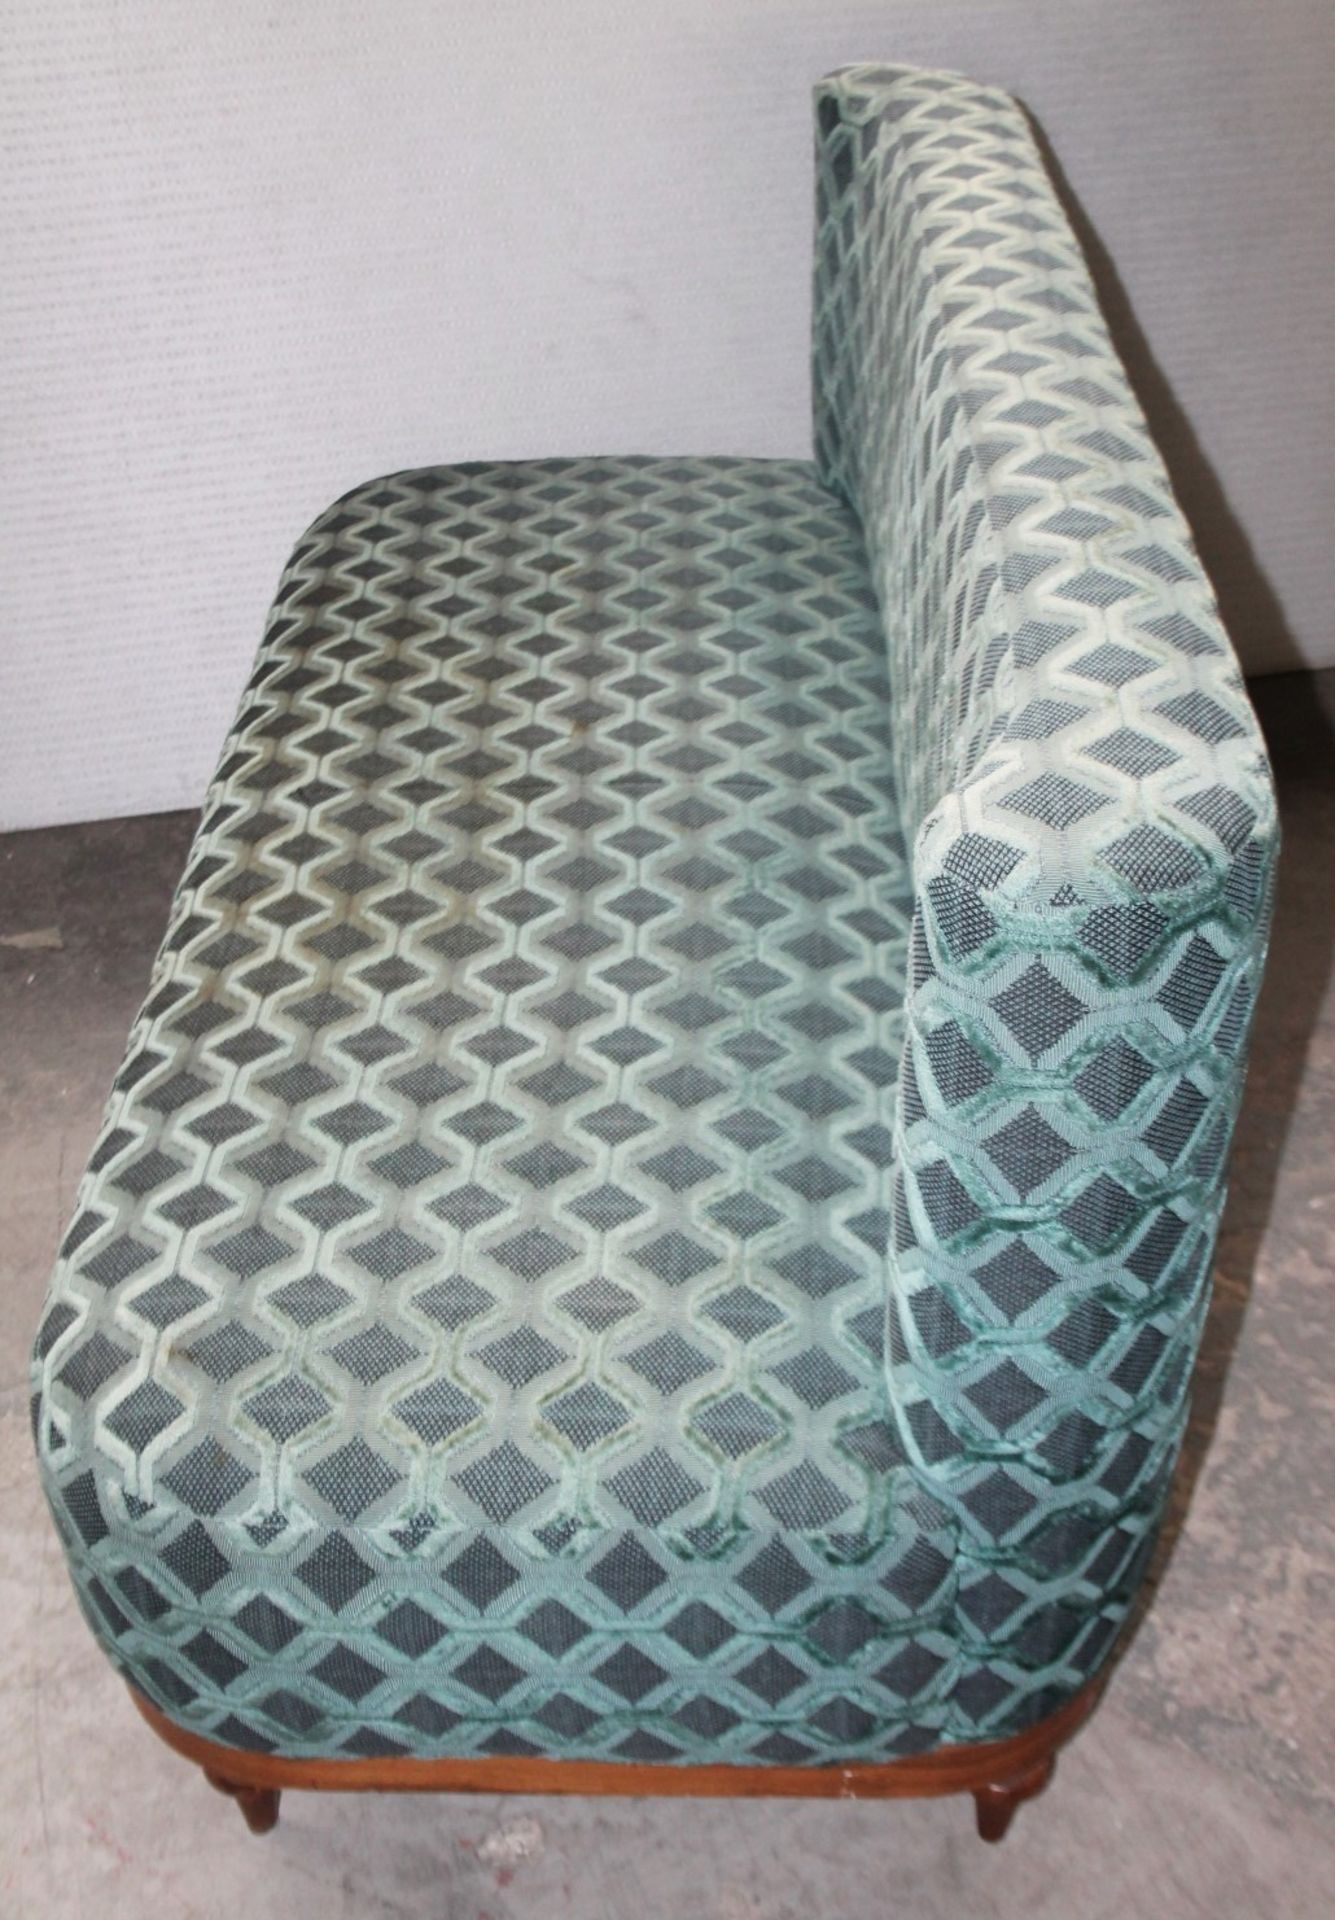 1 x Commercial Freestanding 2-Seater Booth Seating Sofa, Upholstered In Premium Teal Fabrics - Image 5 of 8